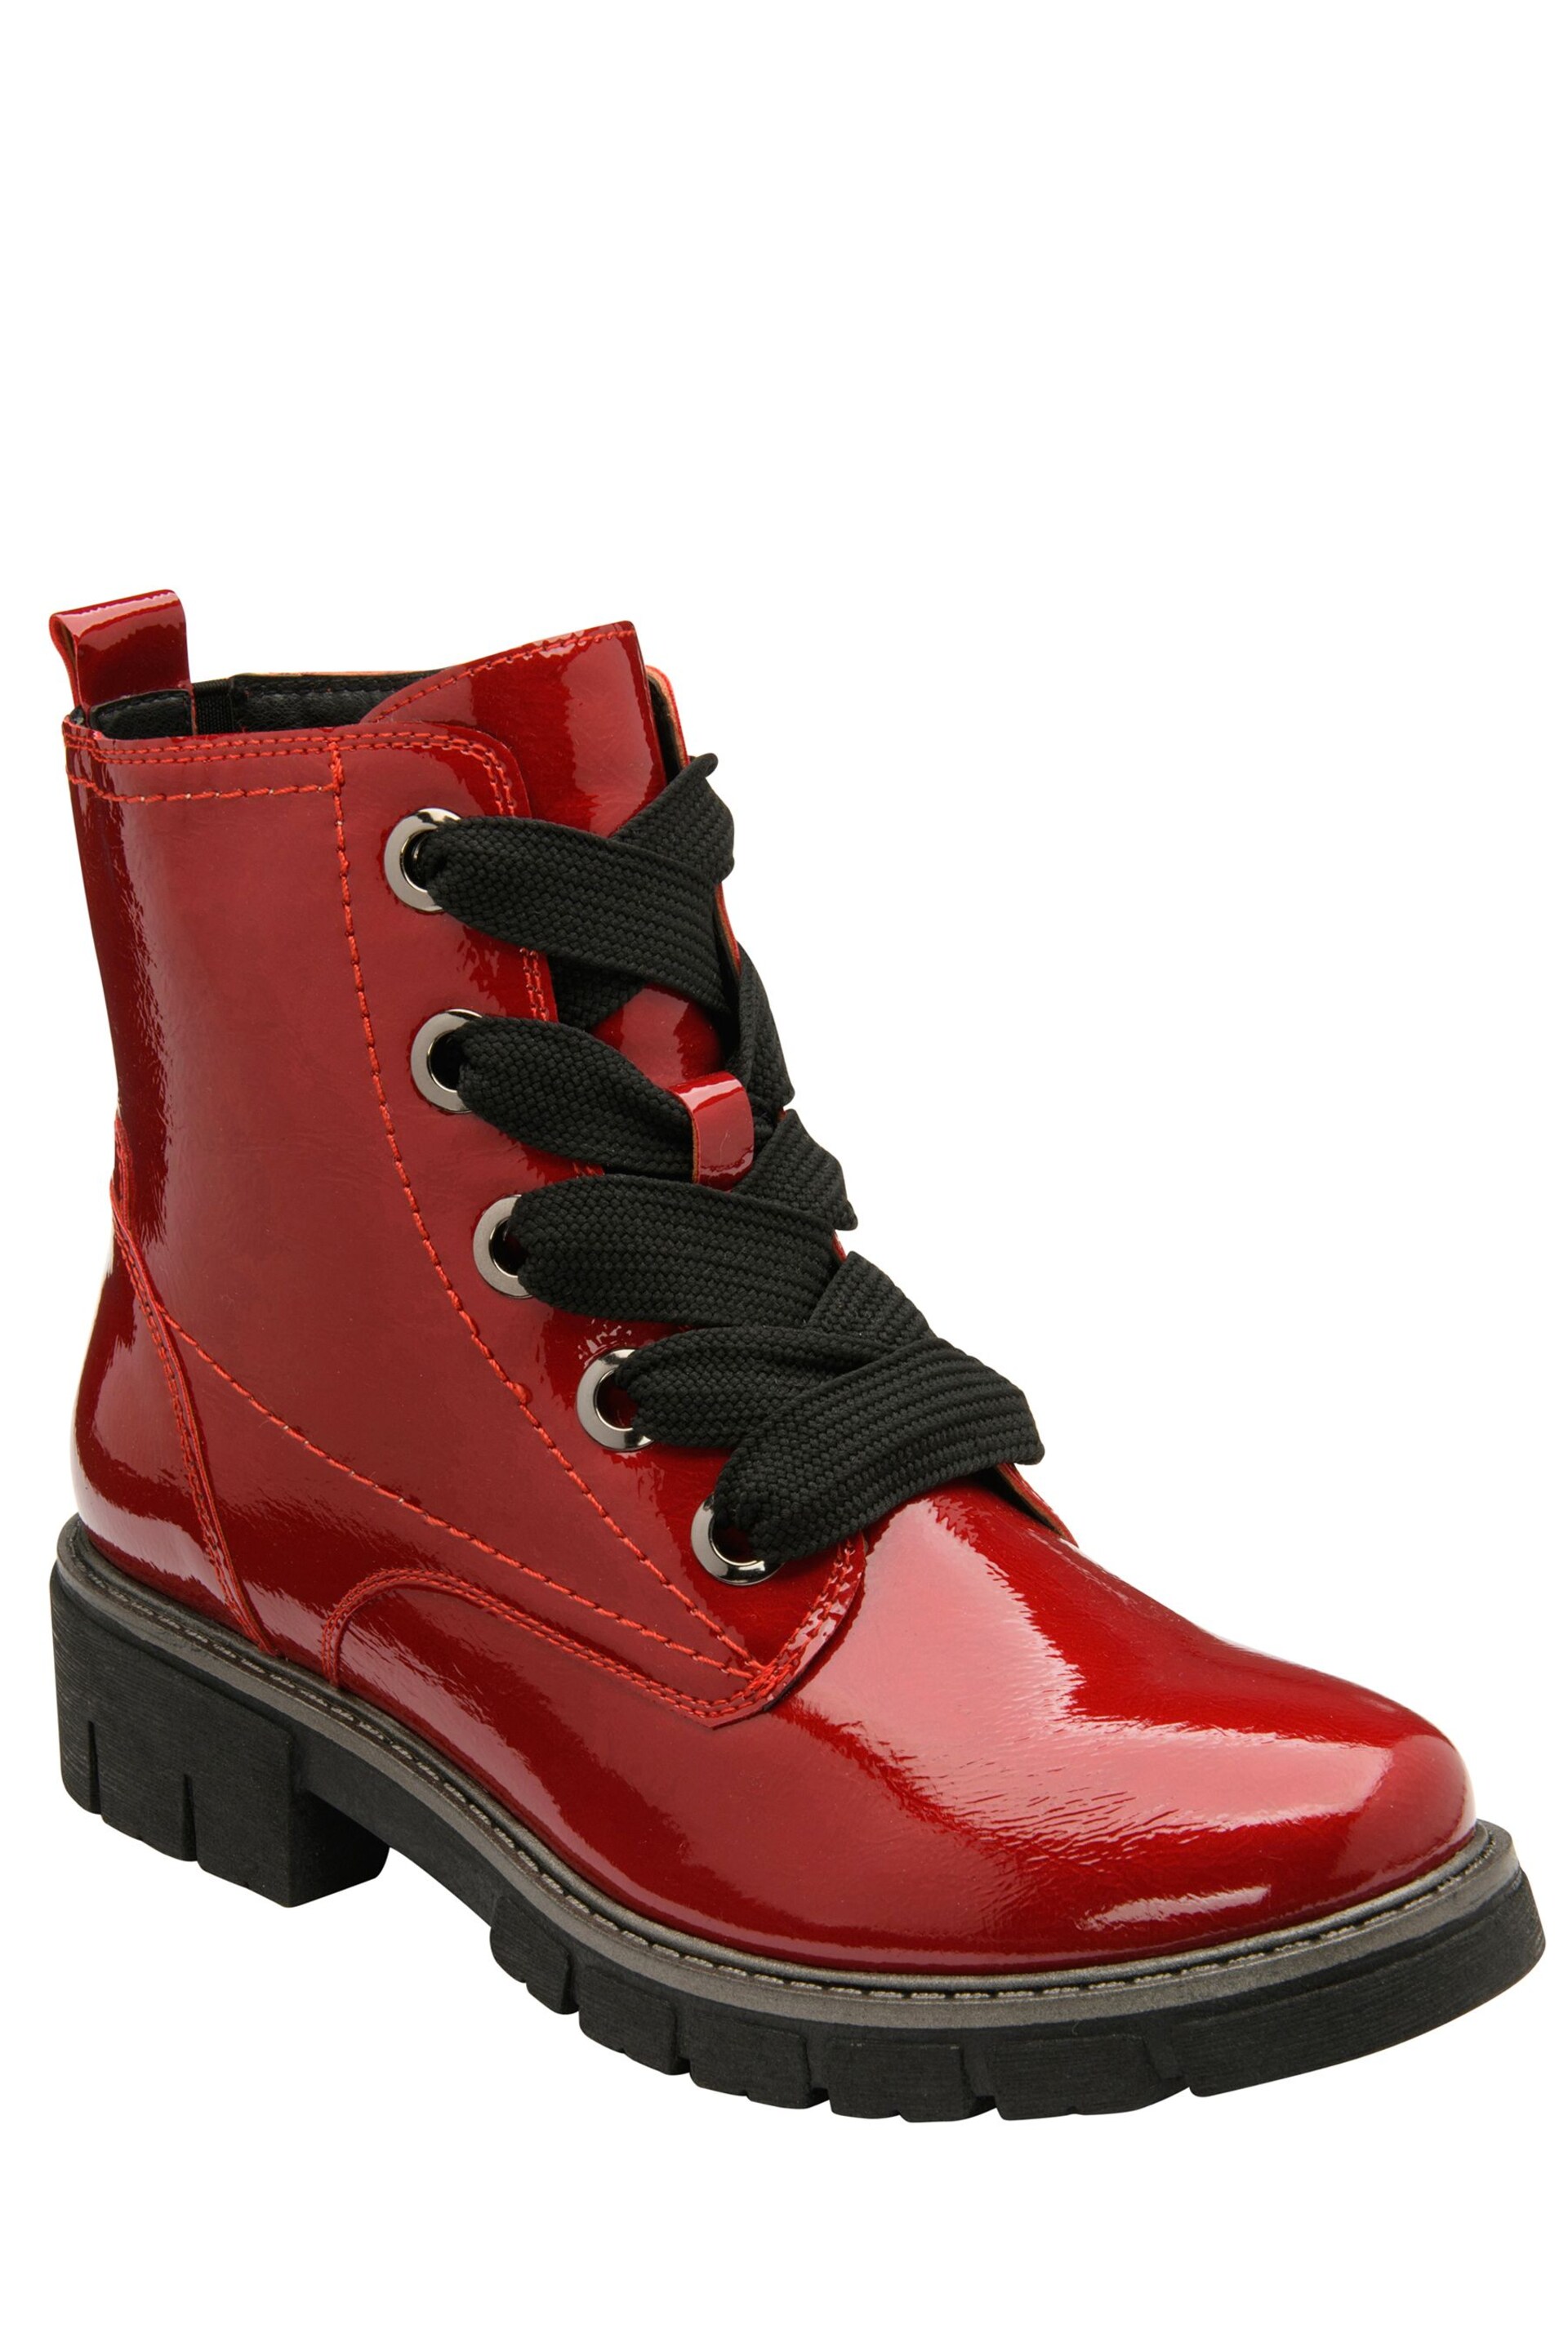 Lotus Red Patent Lace-Up Ankle Boots - Image 1 of 4